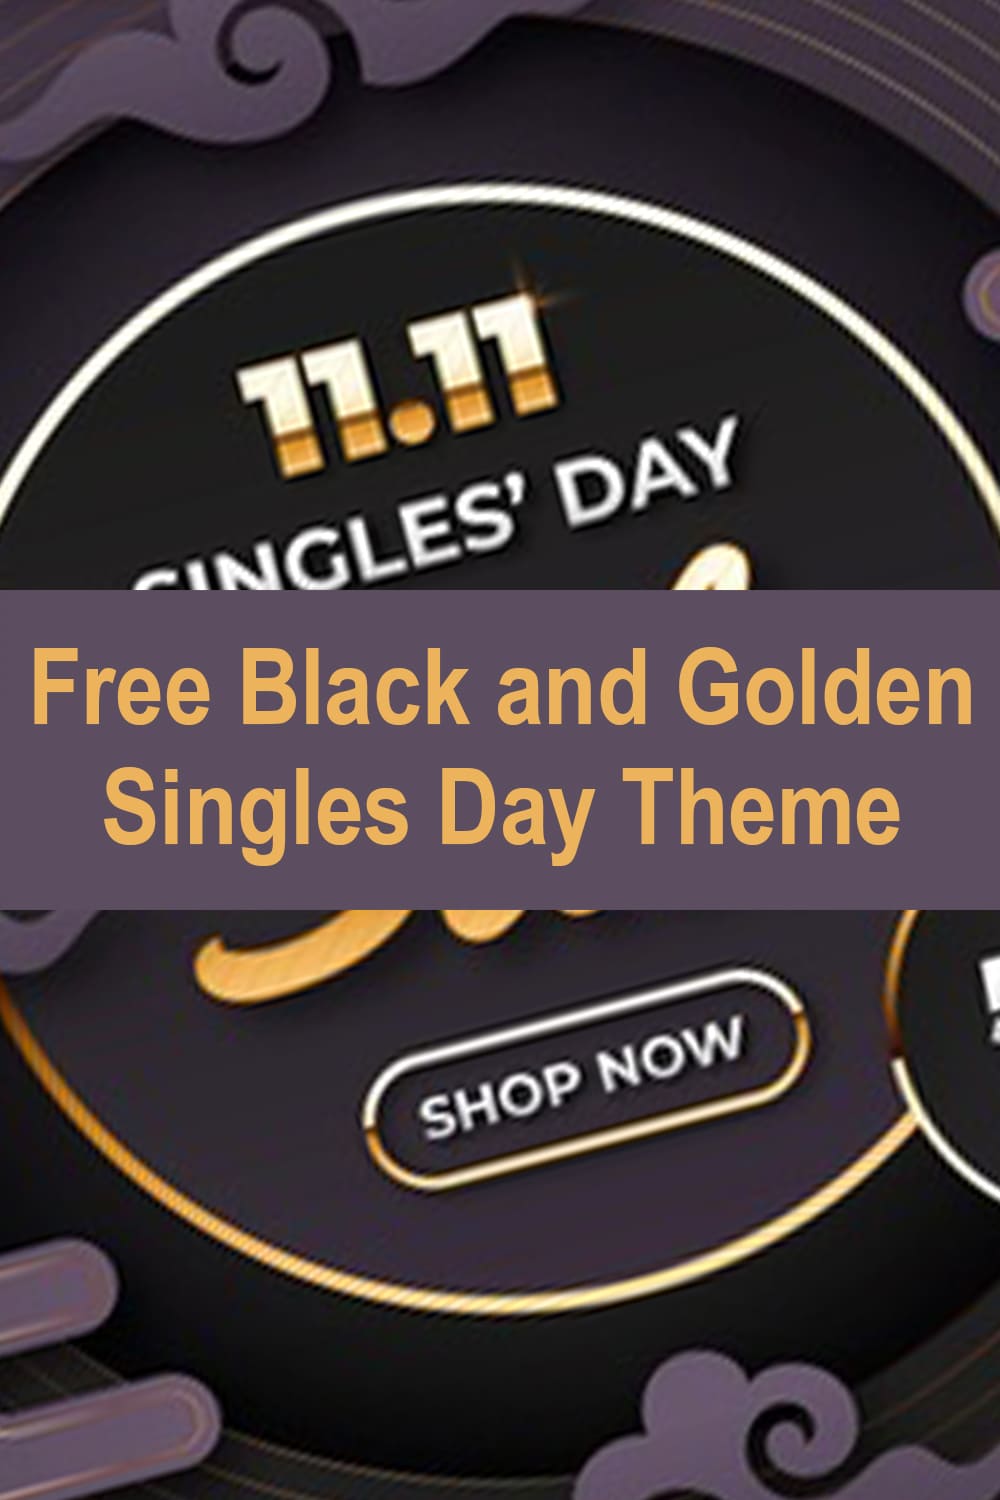 Free Black and Golden Singles Day Theme Pinterest.